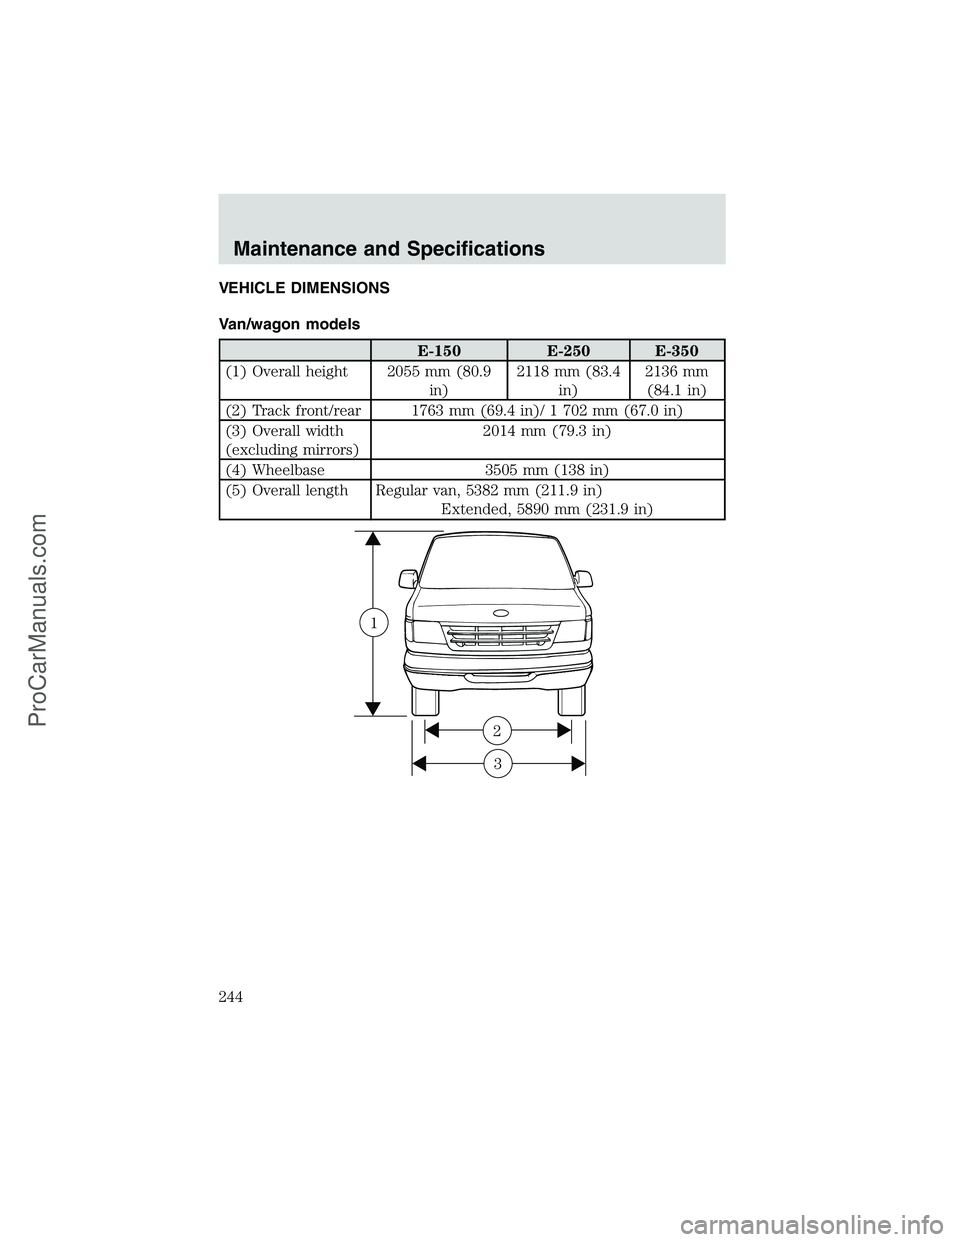 FORD E-350 2002 Repair Manual VEHICLE DIMENSIONS
Van/wagon models
E-150 E-250 E-350
(1) Overall height 2055 mm (80.9
in)2118 mm (83.4
in)2136 mm
(84.1 in)
(2) Track front/rear 1763 mm (69.4 in)/ 1 702 mm (67.0 in)
(3) Overall widt